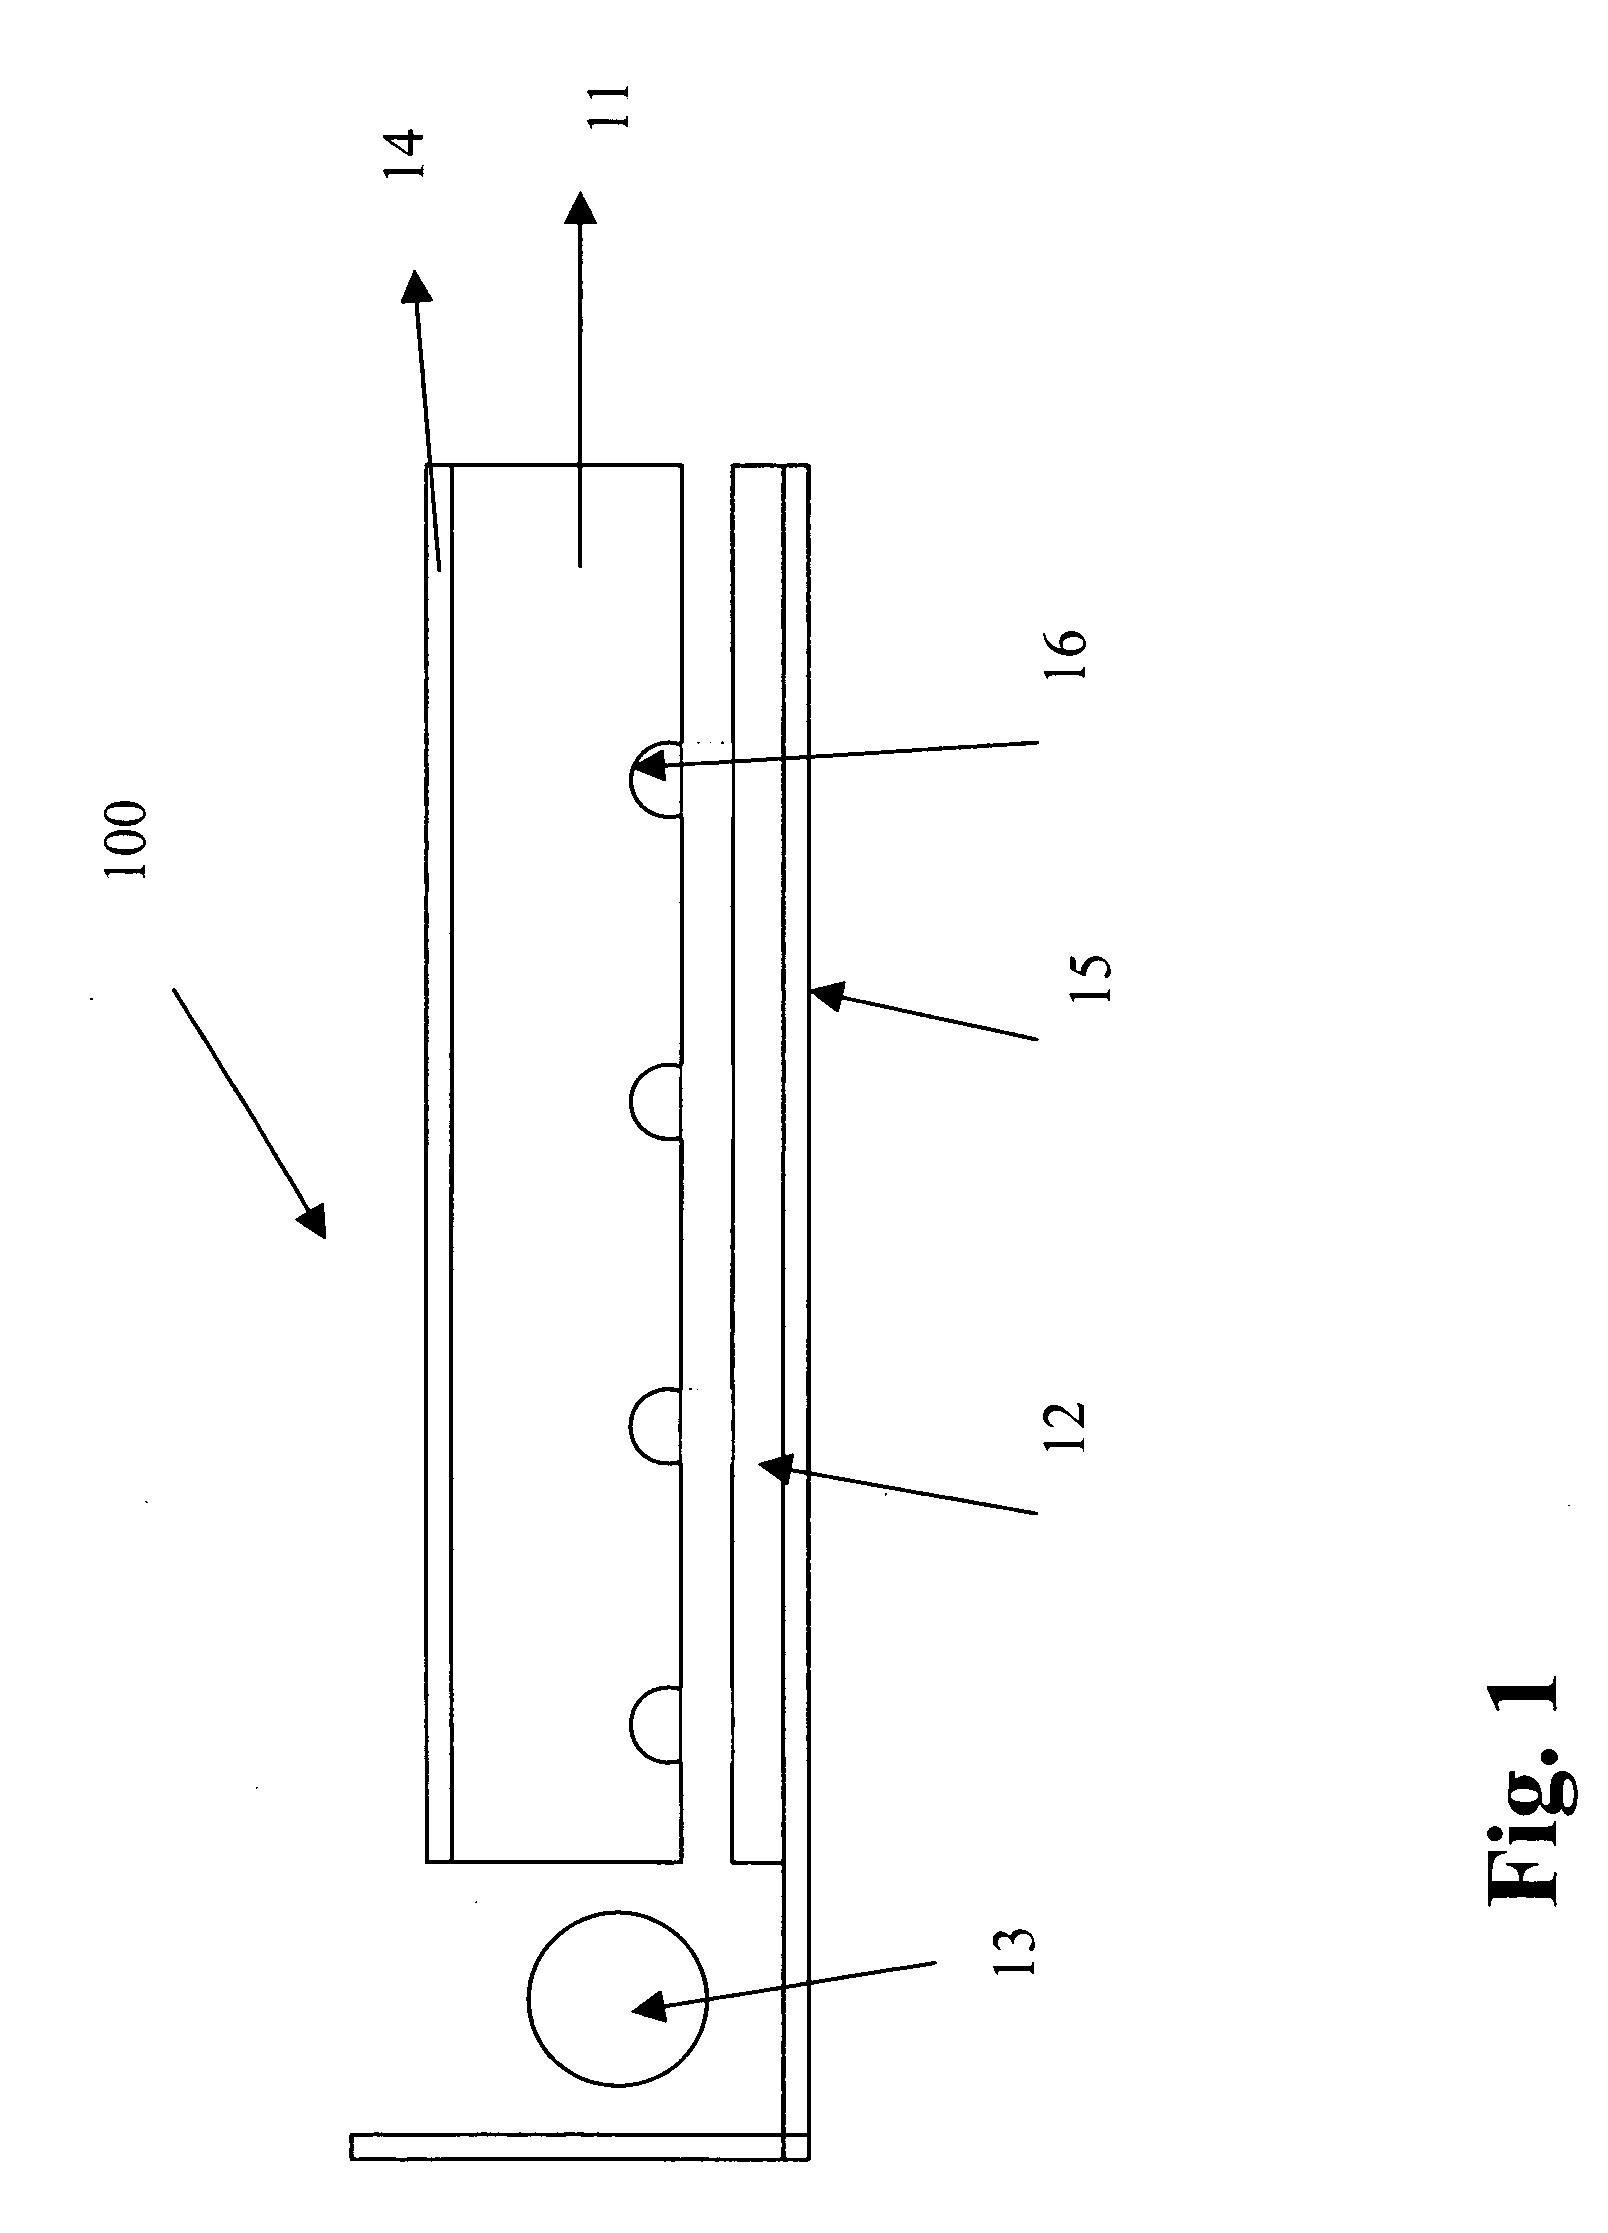 Optical film and frame with high resistance to thermal distortion